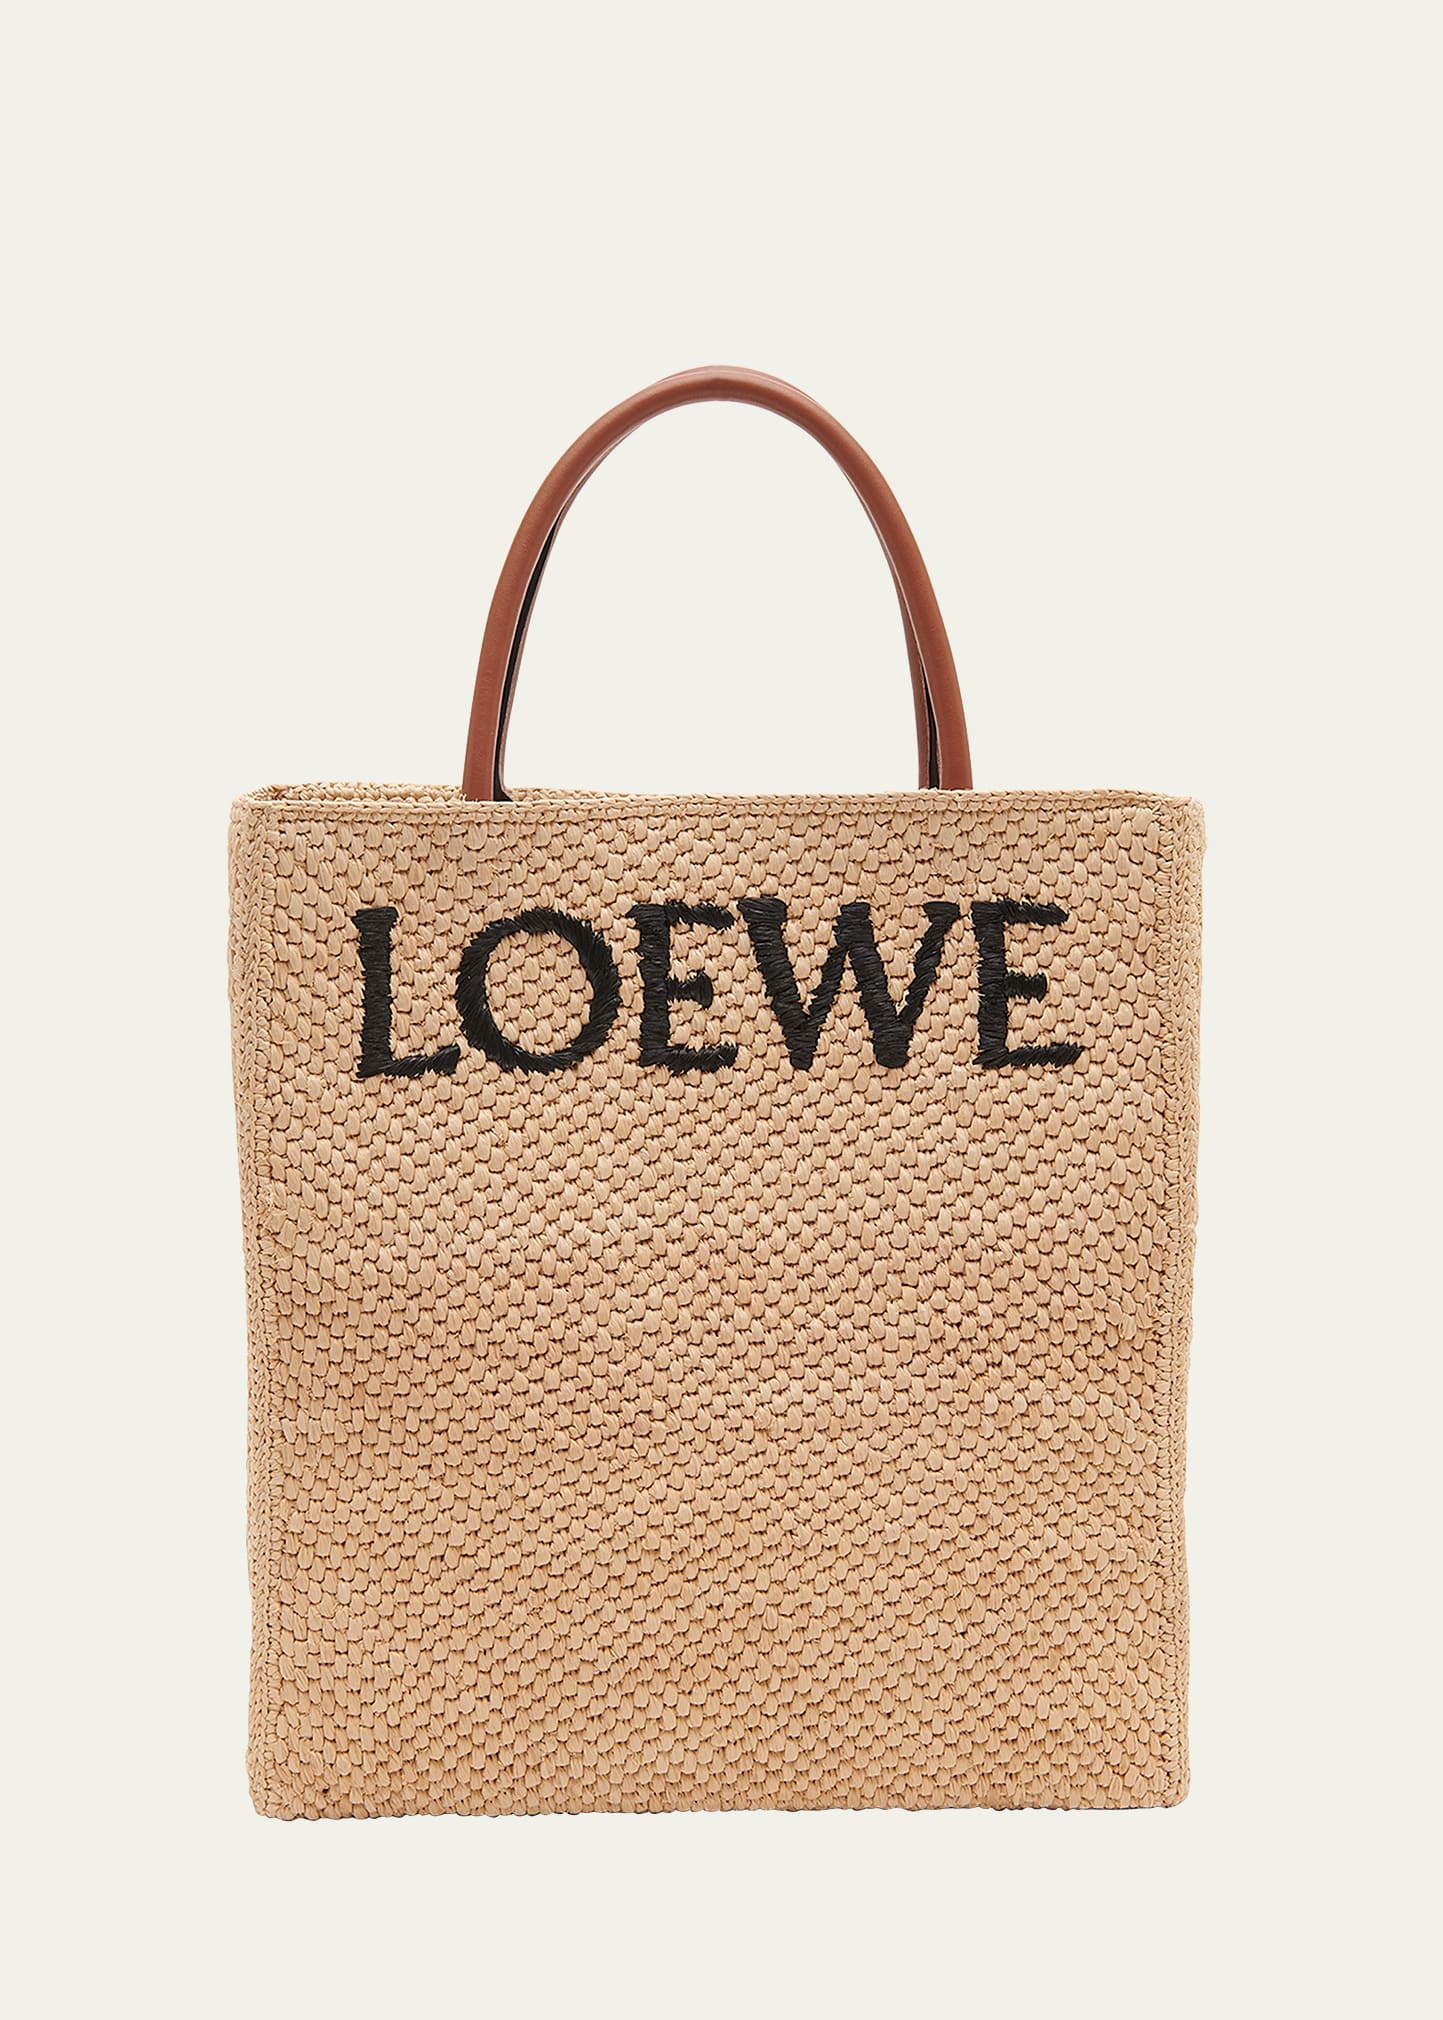 Standard A4 Tote Bag in Raffia with Leather Handles